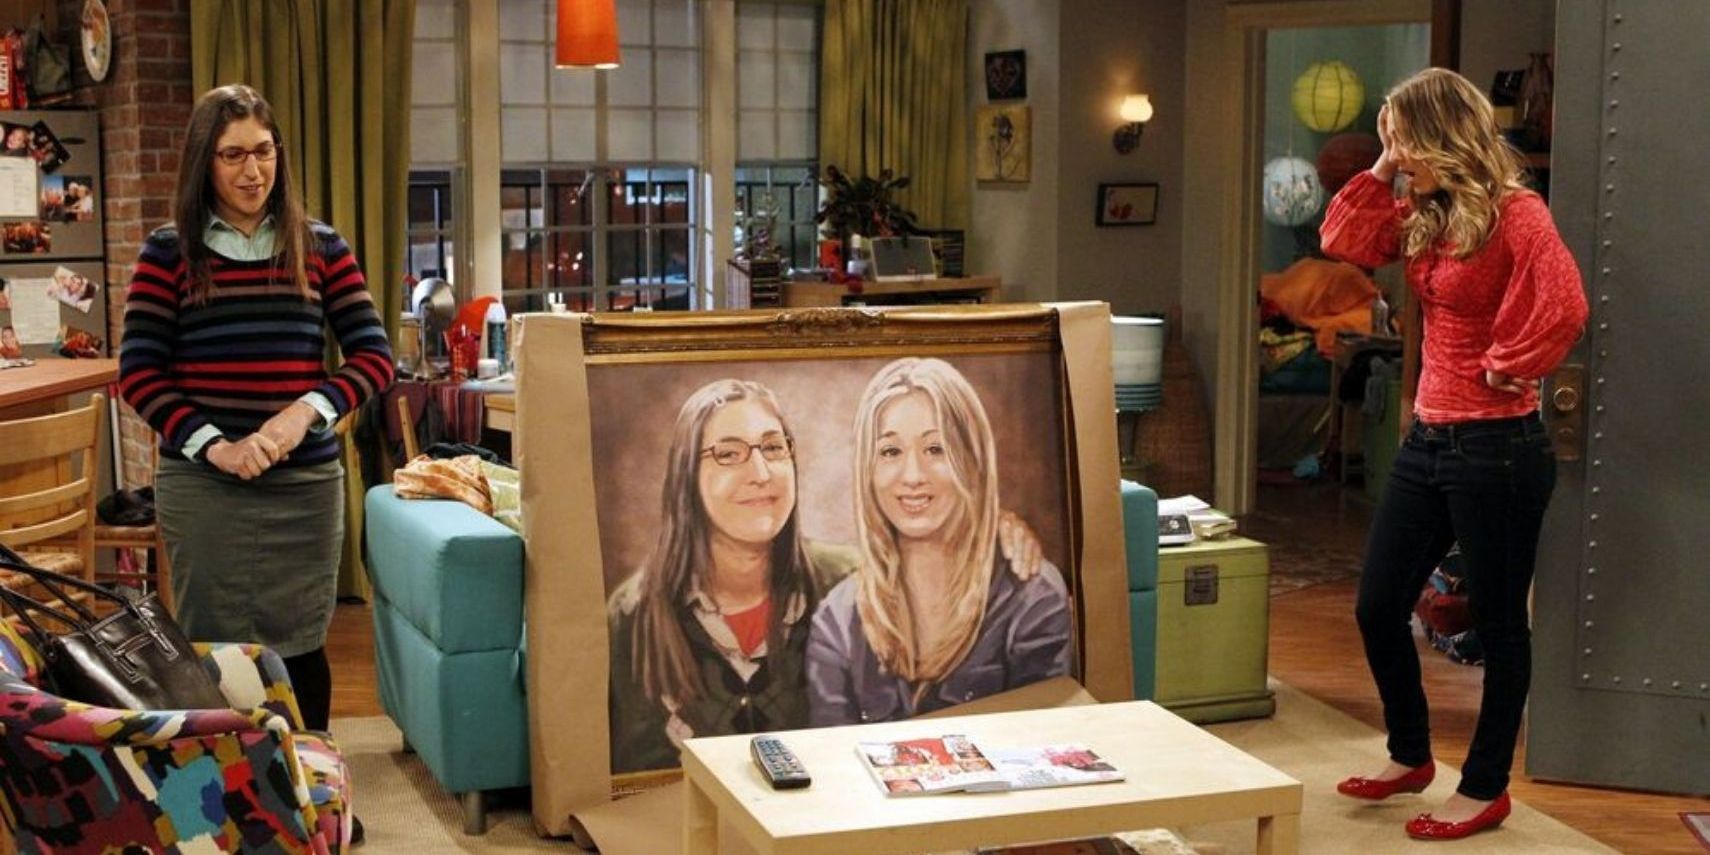 Amy shows Penny her commissioned oil painting of them